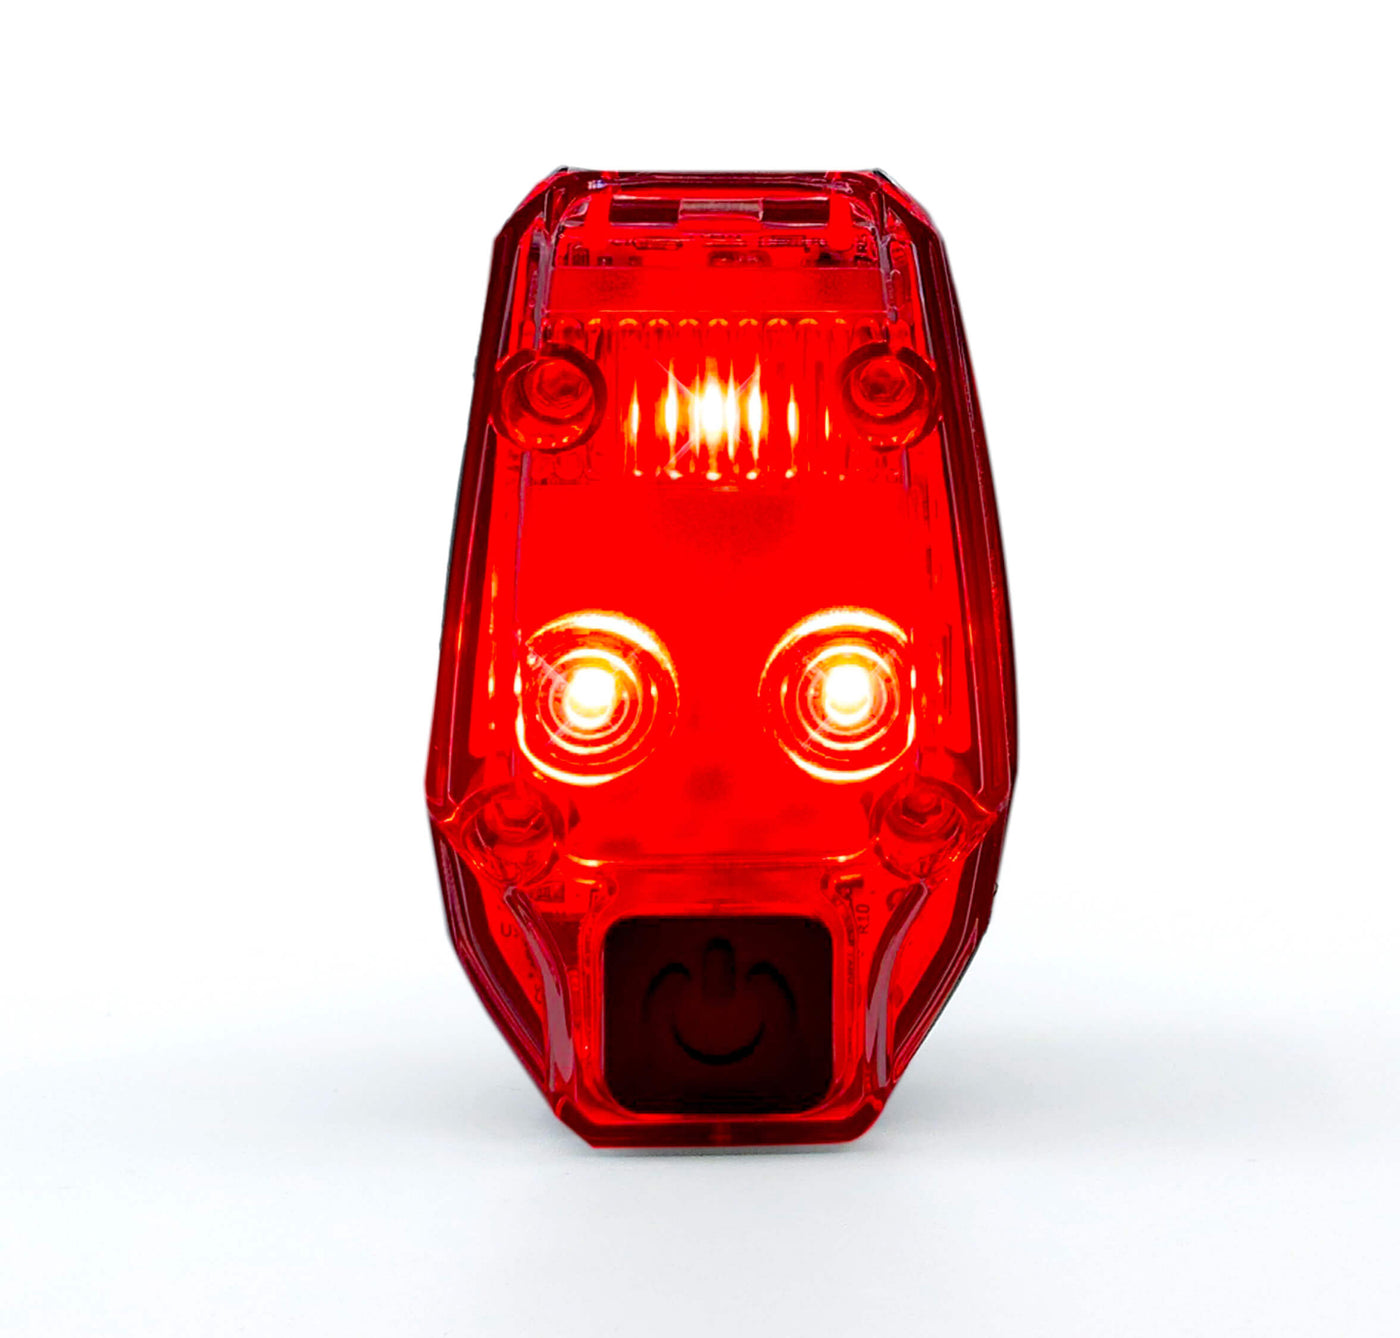 Tailgator LED Bike Brake Light with Motion Detection - Stay Safe on Your Bicycle